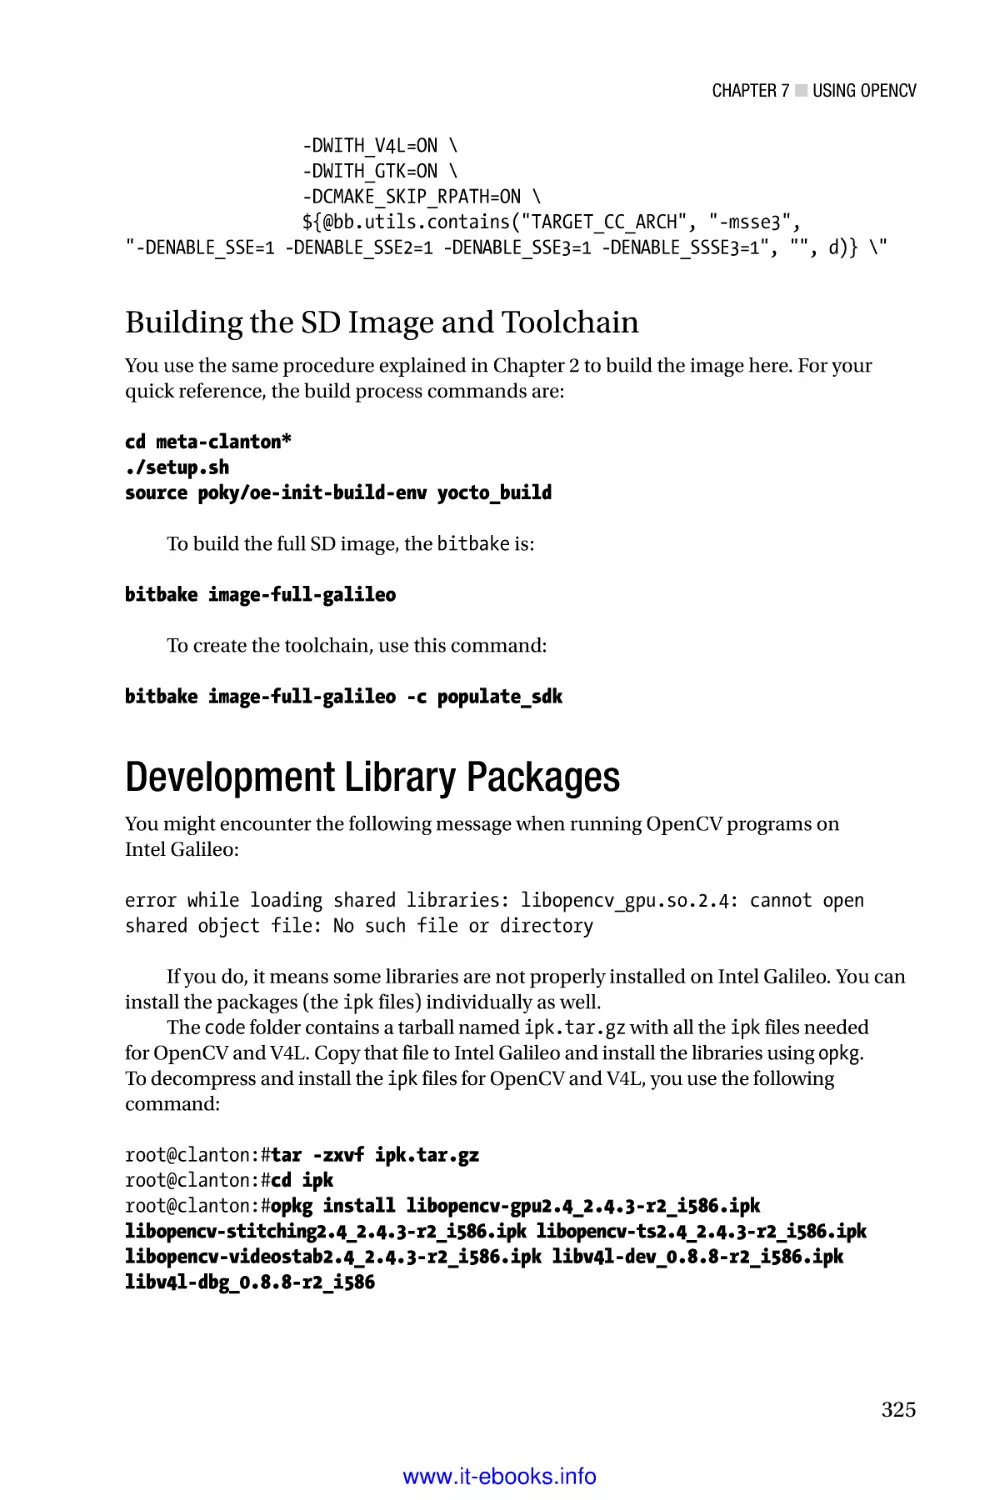 Building the SD Image and Toolchain
Development Library Packages